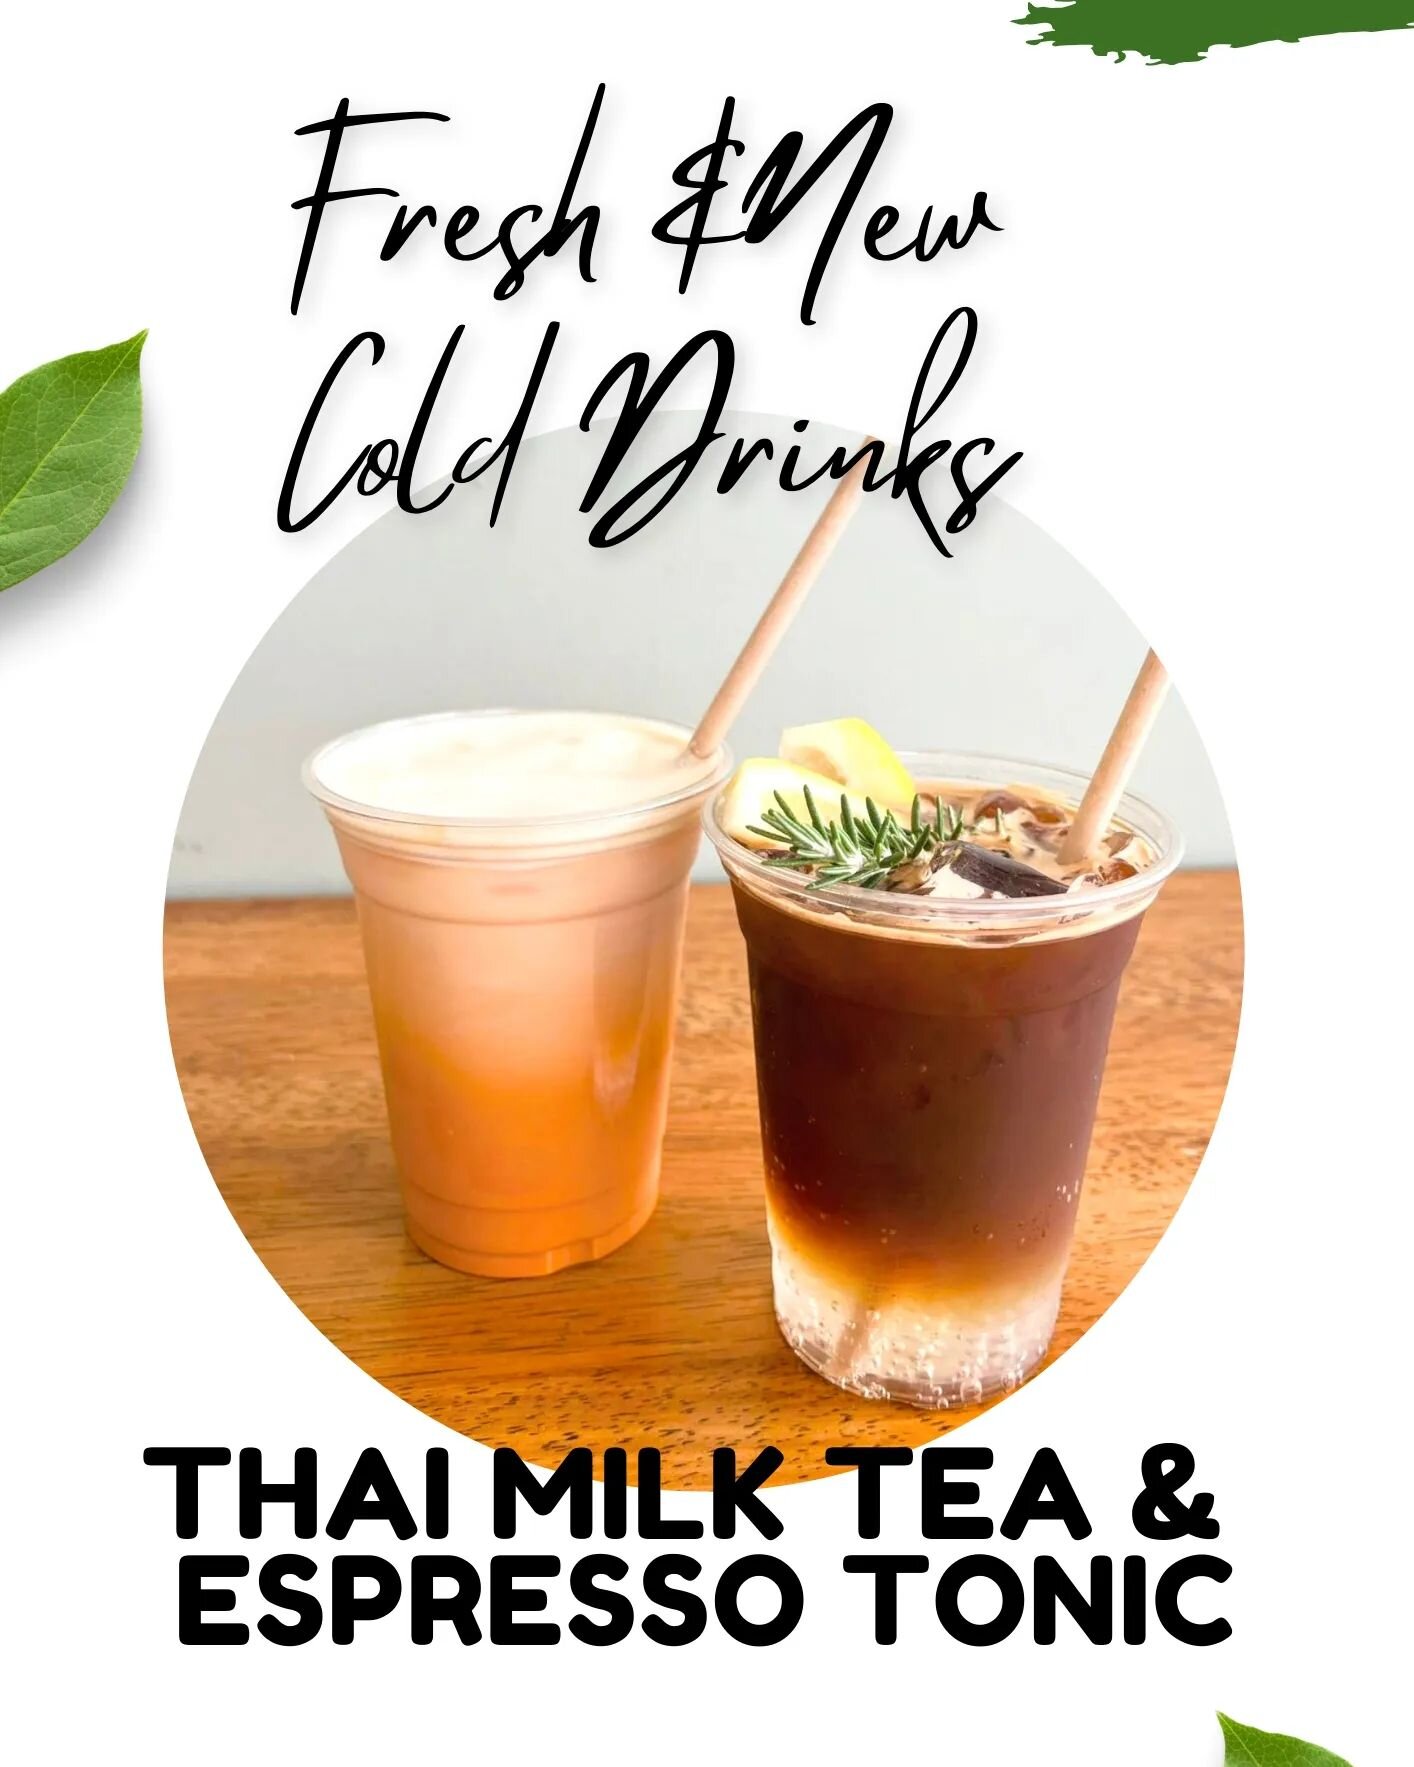 Get out there and beat the heat with our new COLD DRINKS!
Our sweet and creamy Thai Milk tea with cold milk foam OR light and spritzy Espresso Tonic! 

@kensington.3031 #kensington3031 #kensingtonlocal #northmelbournecafe #kensingtonvic #yum #refresh